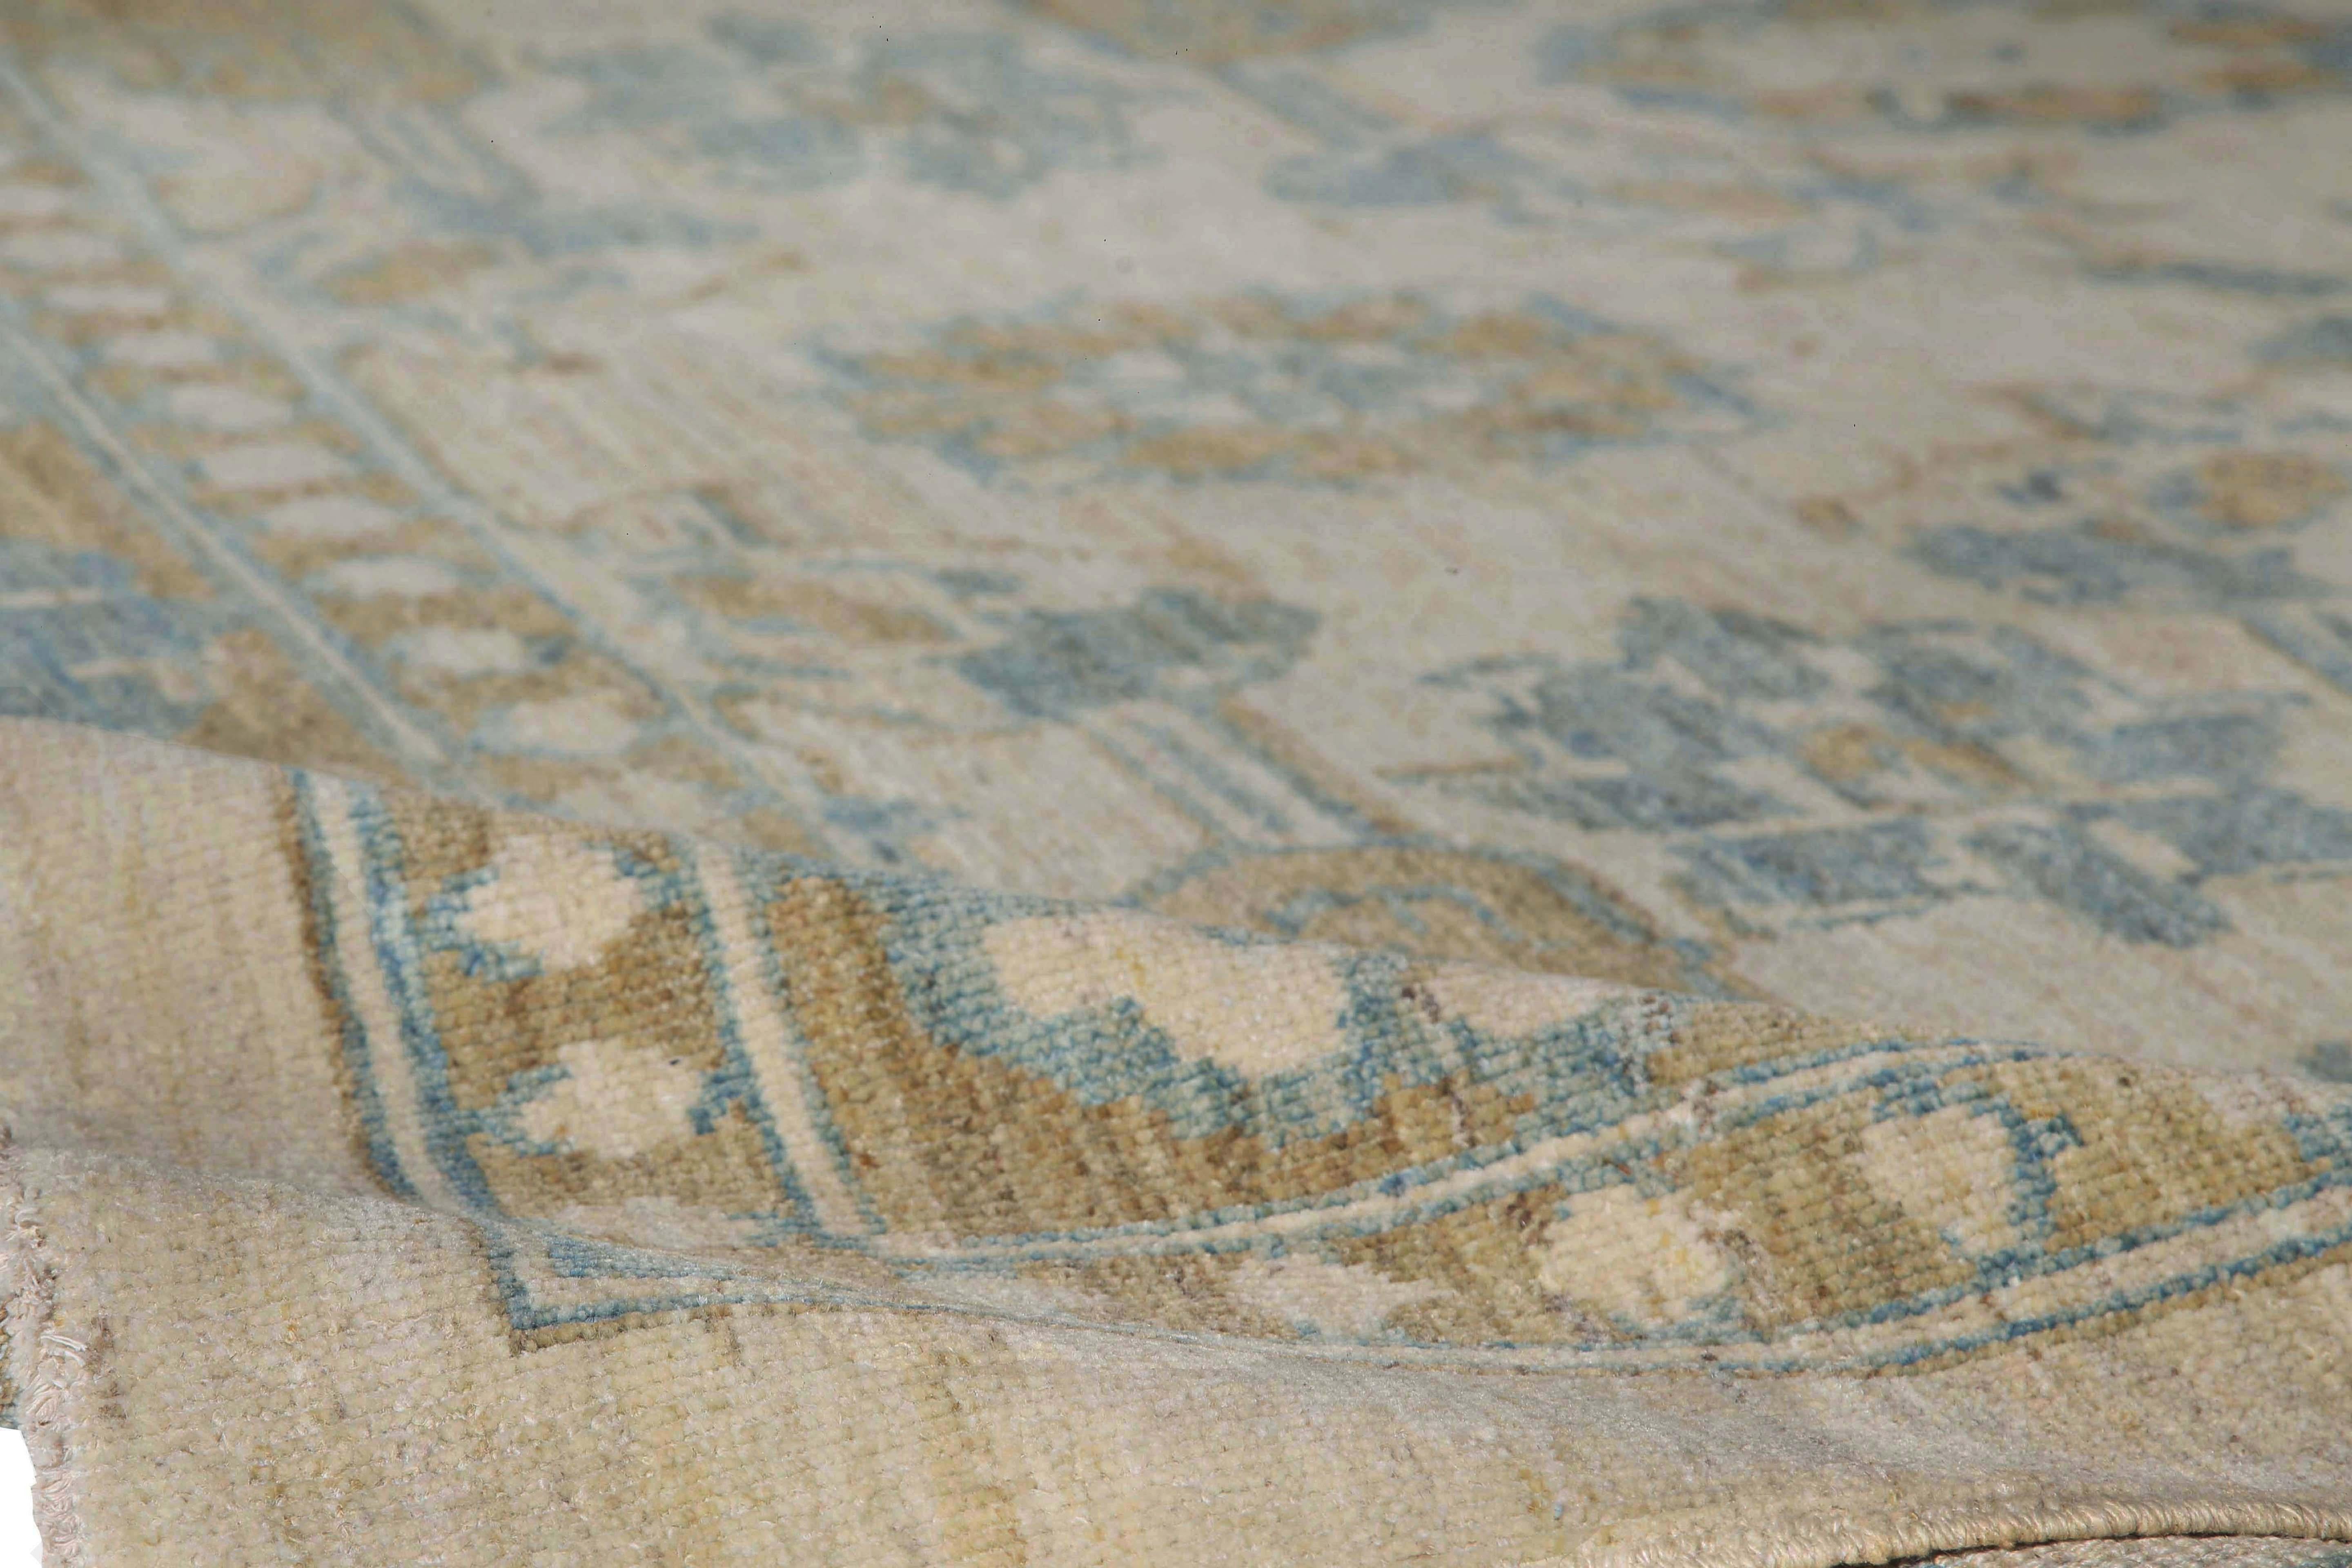 Hand-Woven Luxurious Handmade Sultanabad Rug - Transitional Design, Blue, Green, and Yellow For Sale